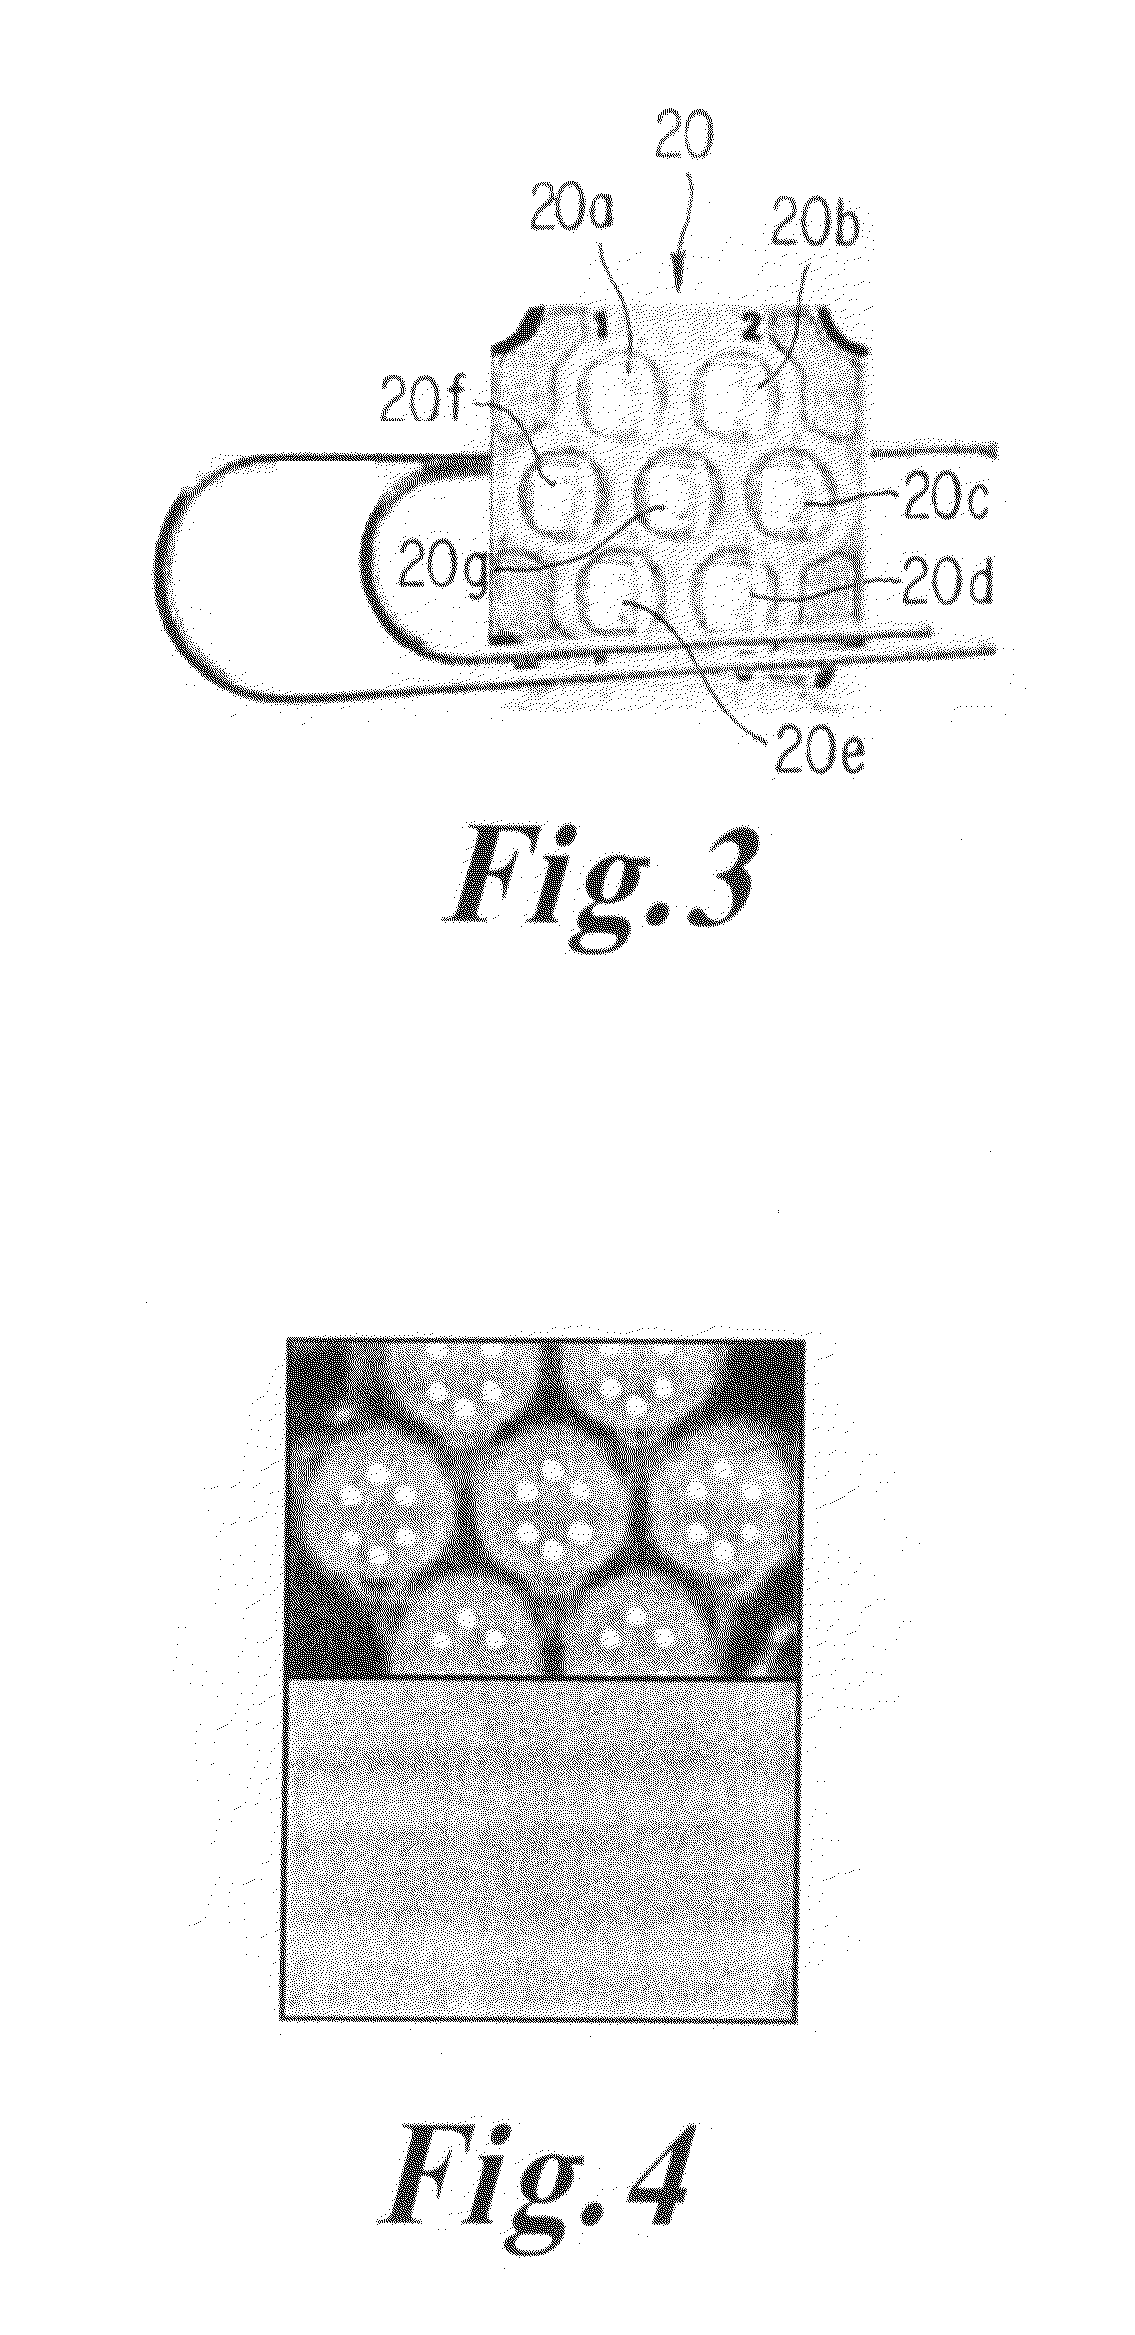 Microarray imaging system and associated methodology